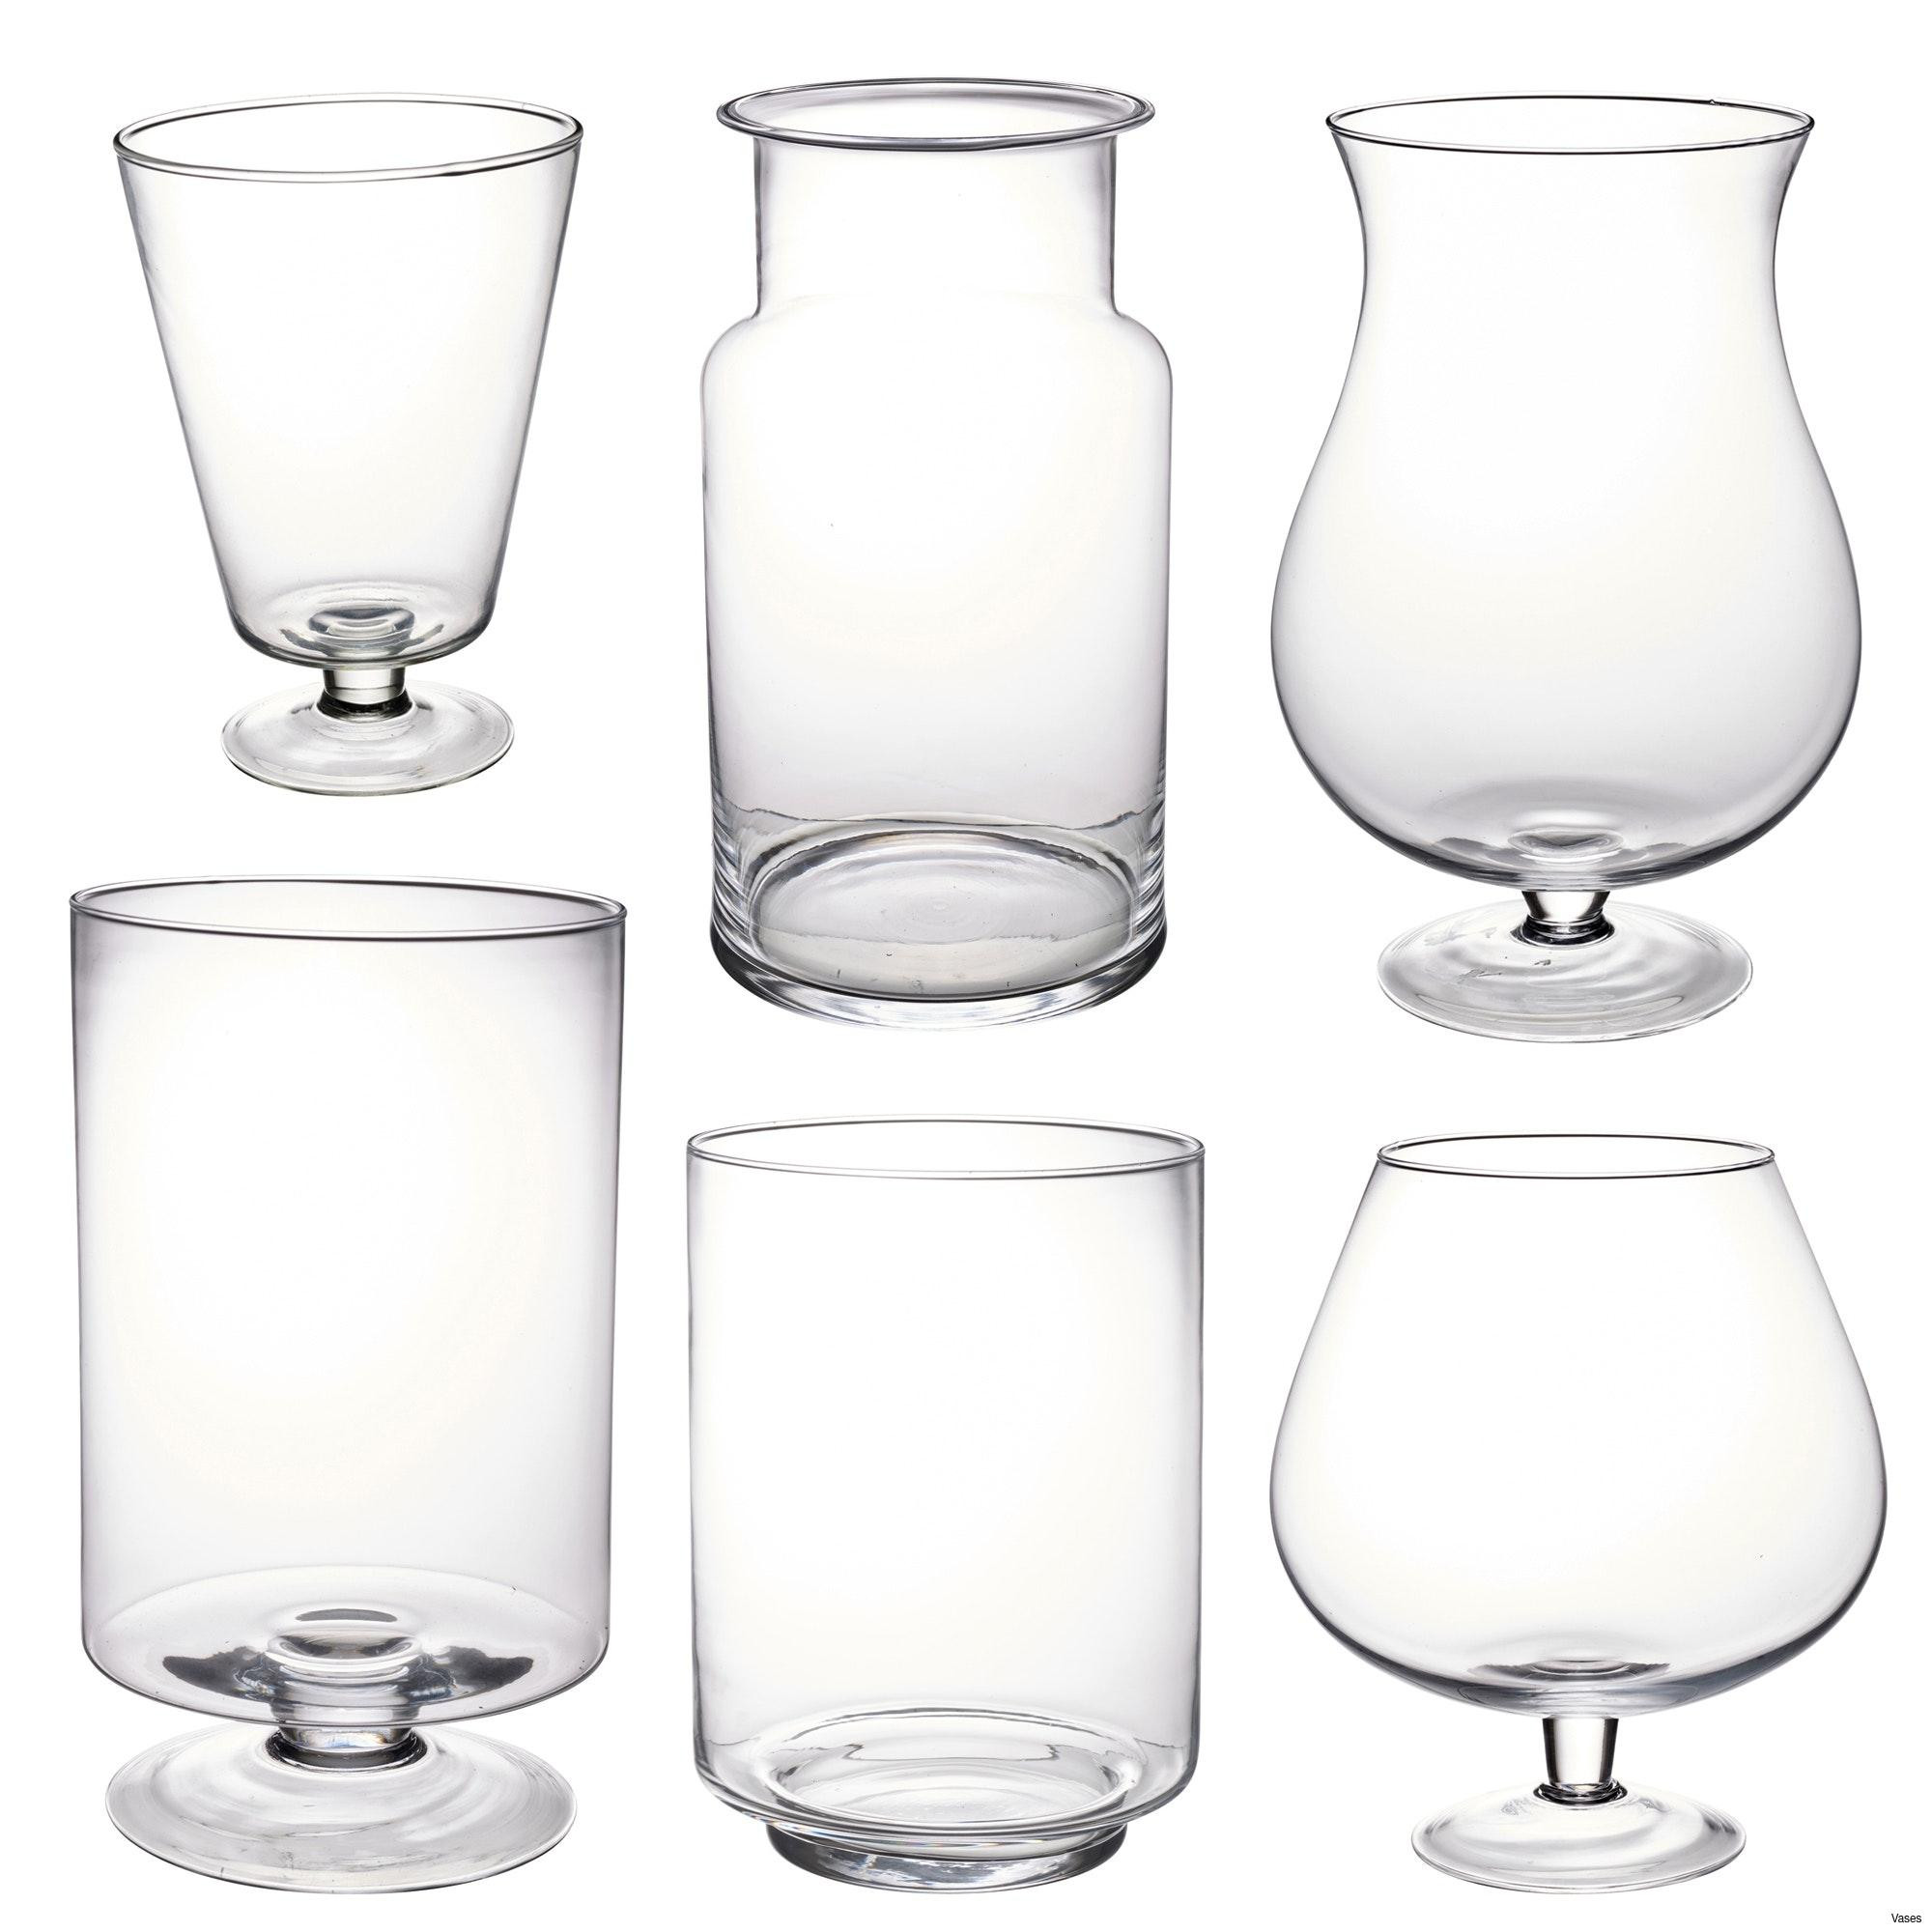 30 Ideal Square Glass Vases 2024 free download square glass vases of unique dining room accent with reference to living room small vases within unique dining room accent with reference to living room small vases beautiful cheap glass vas